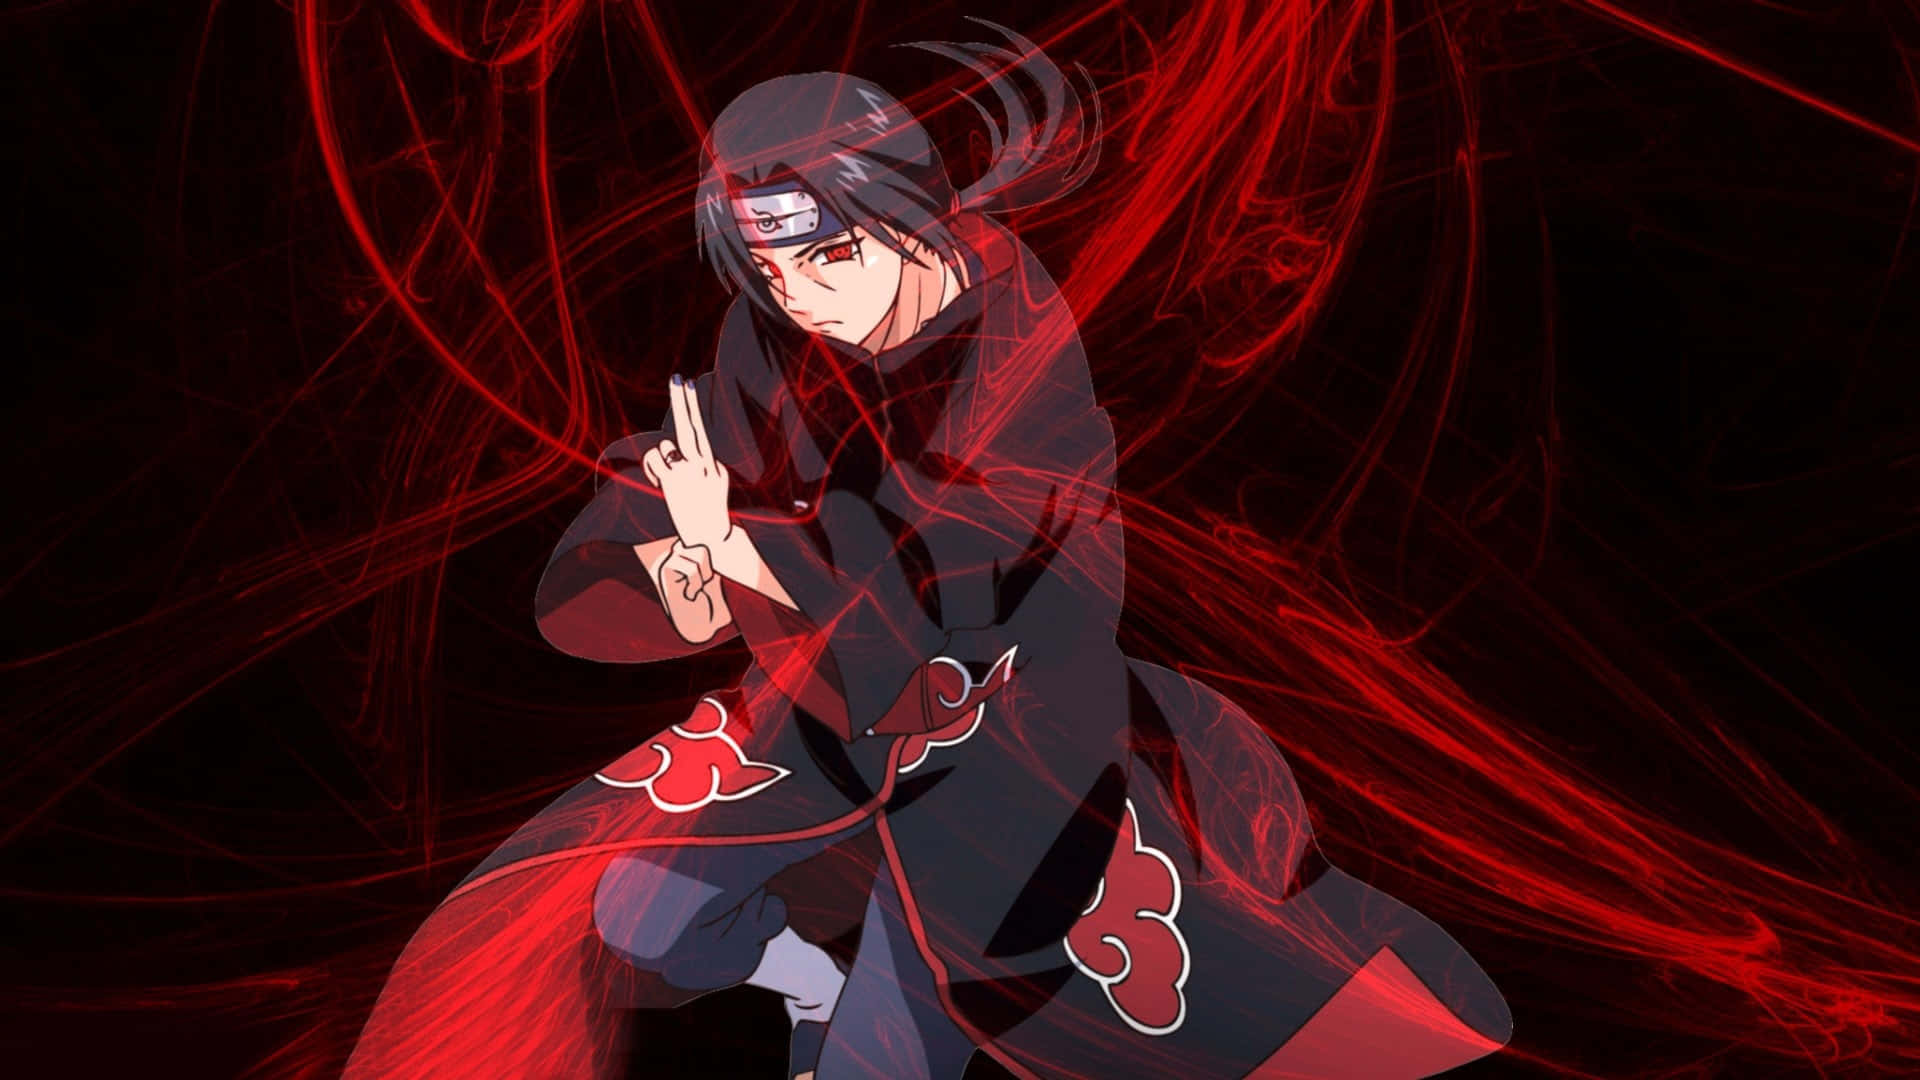 Itachi Aesthetic Posing With Jutsu Style In Black And Red Background. Background